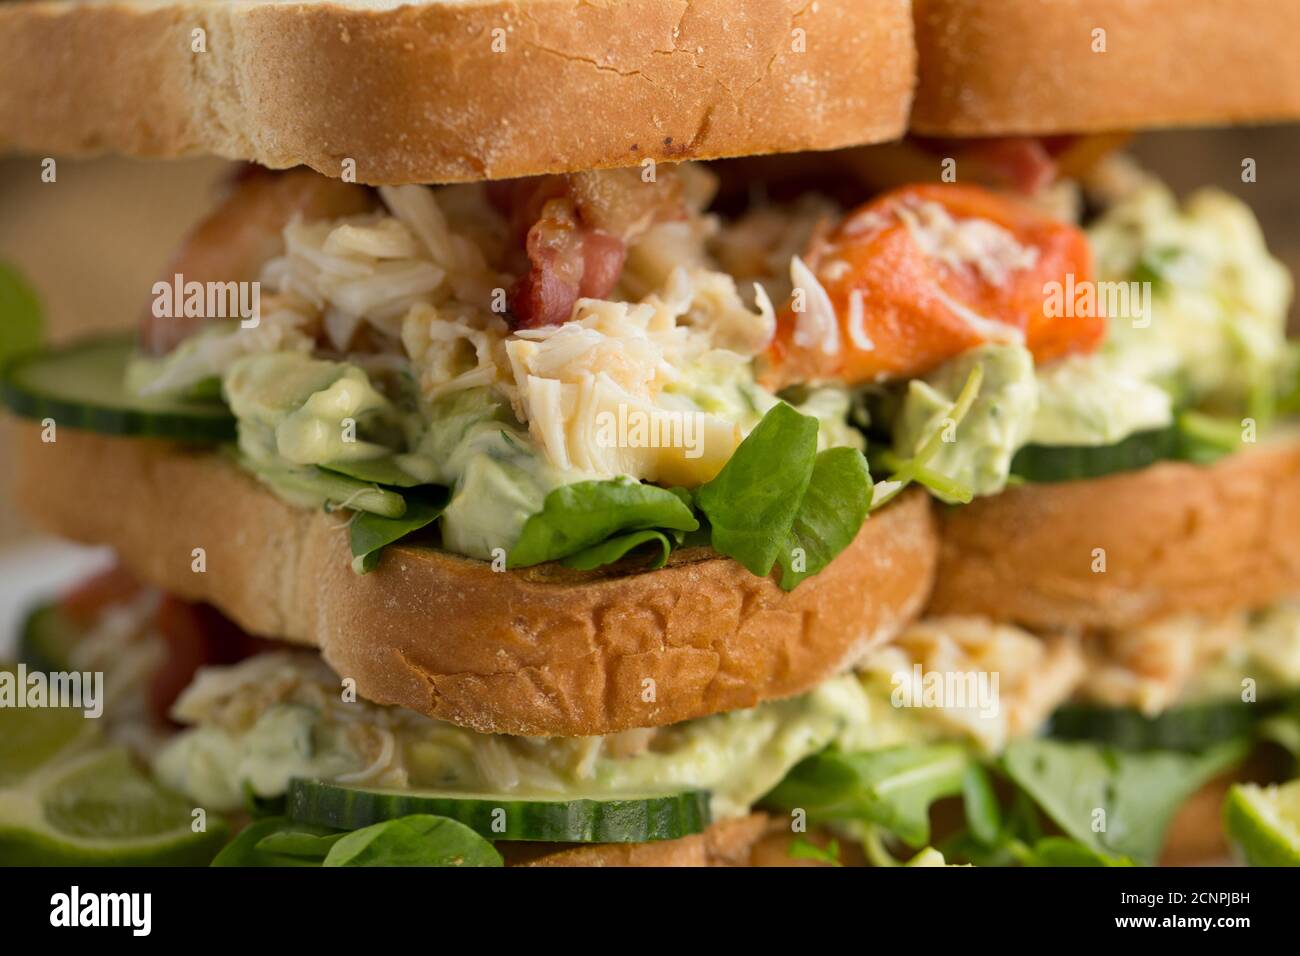 A crab sandwich on toasted bread made from a brown crab, Cancer pagurus, dressed with mayonnaise, lime, dill, avocado, salad and crispy smoked bacon. Stock Photo